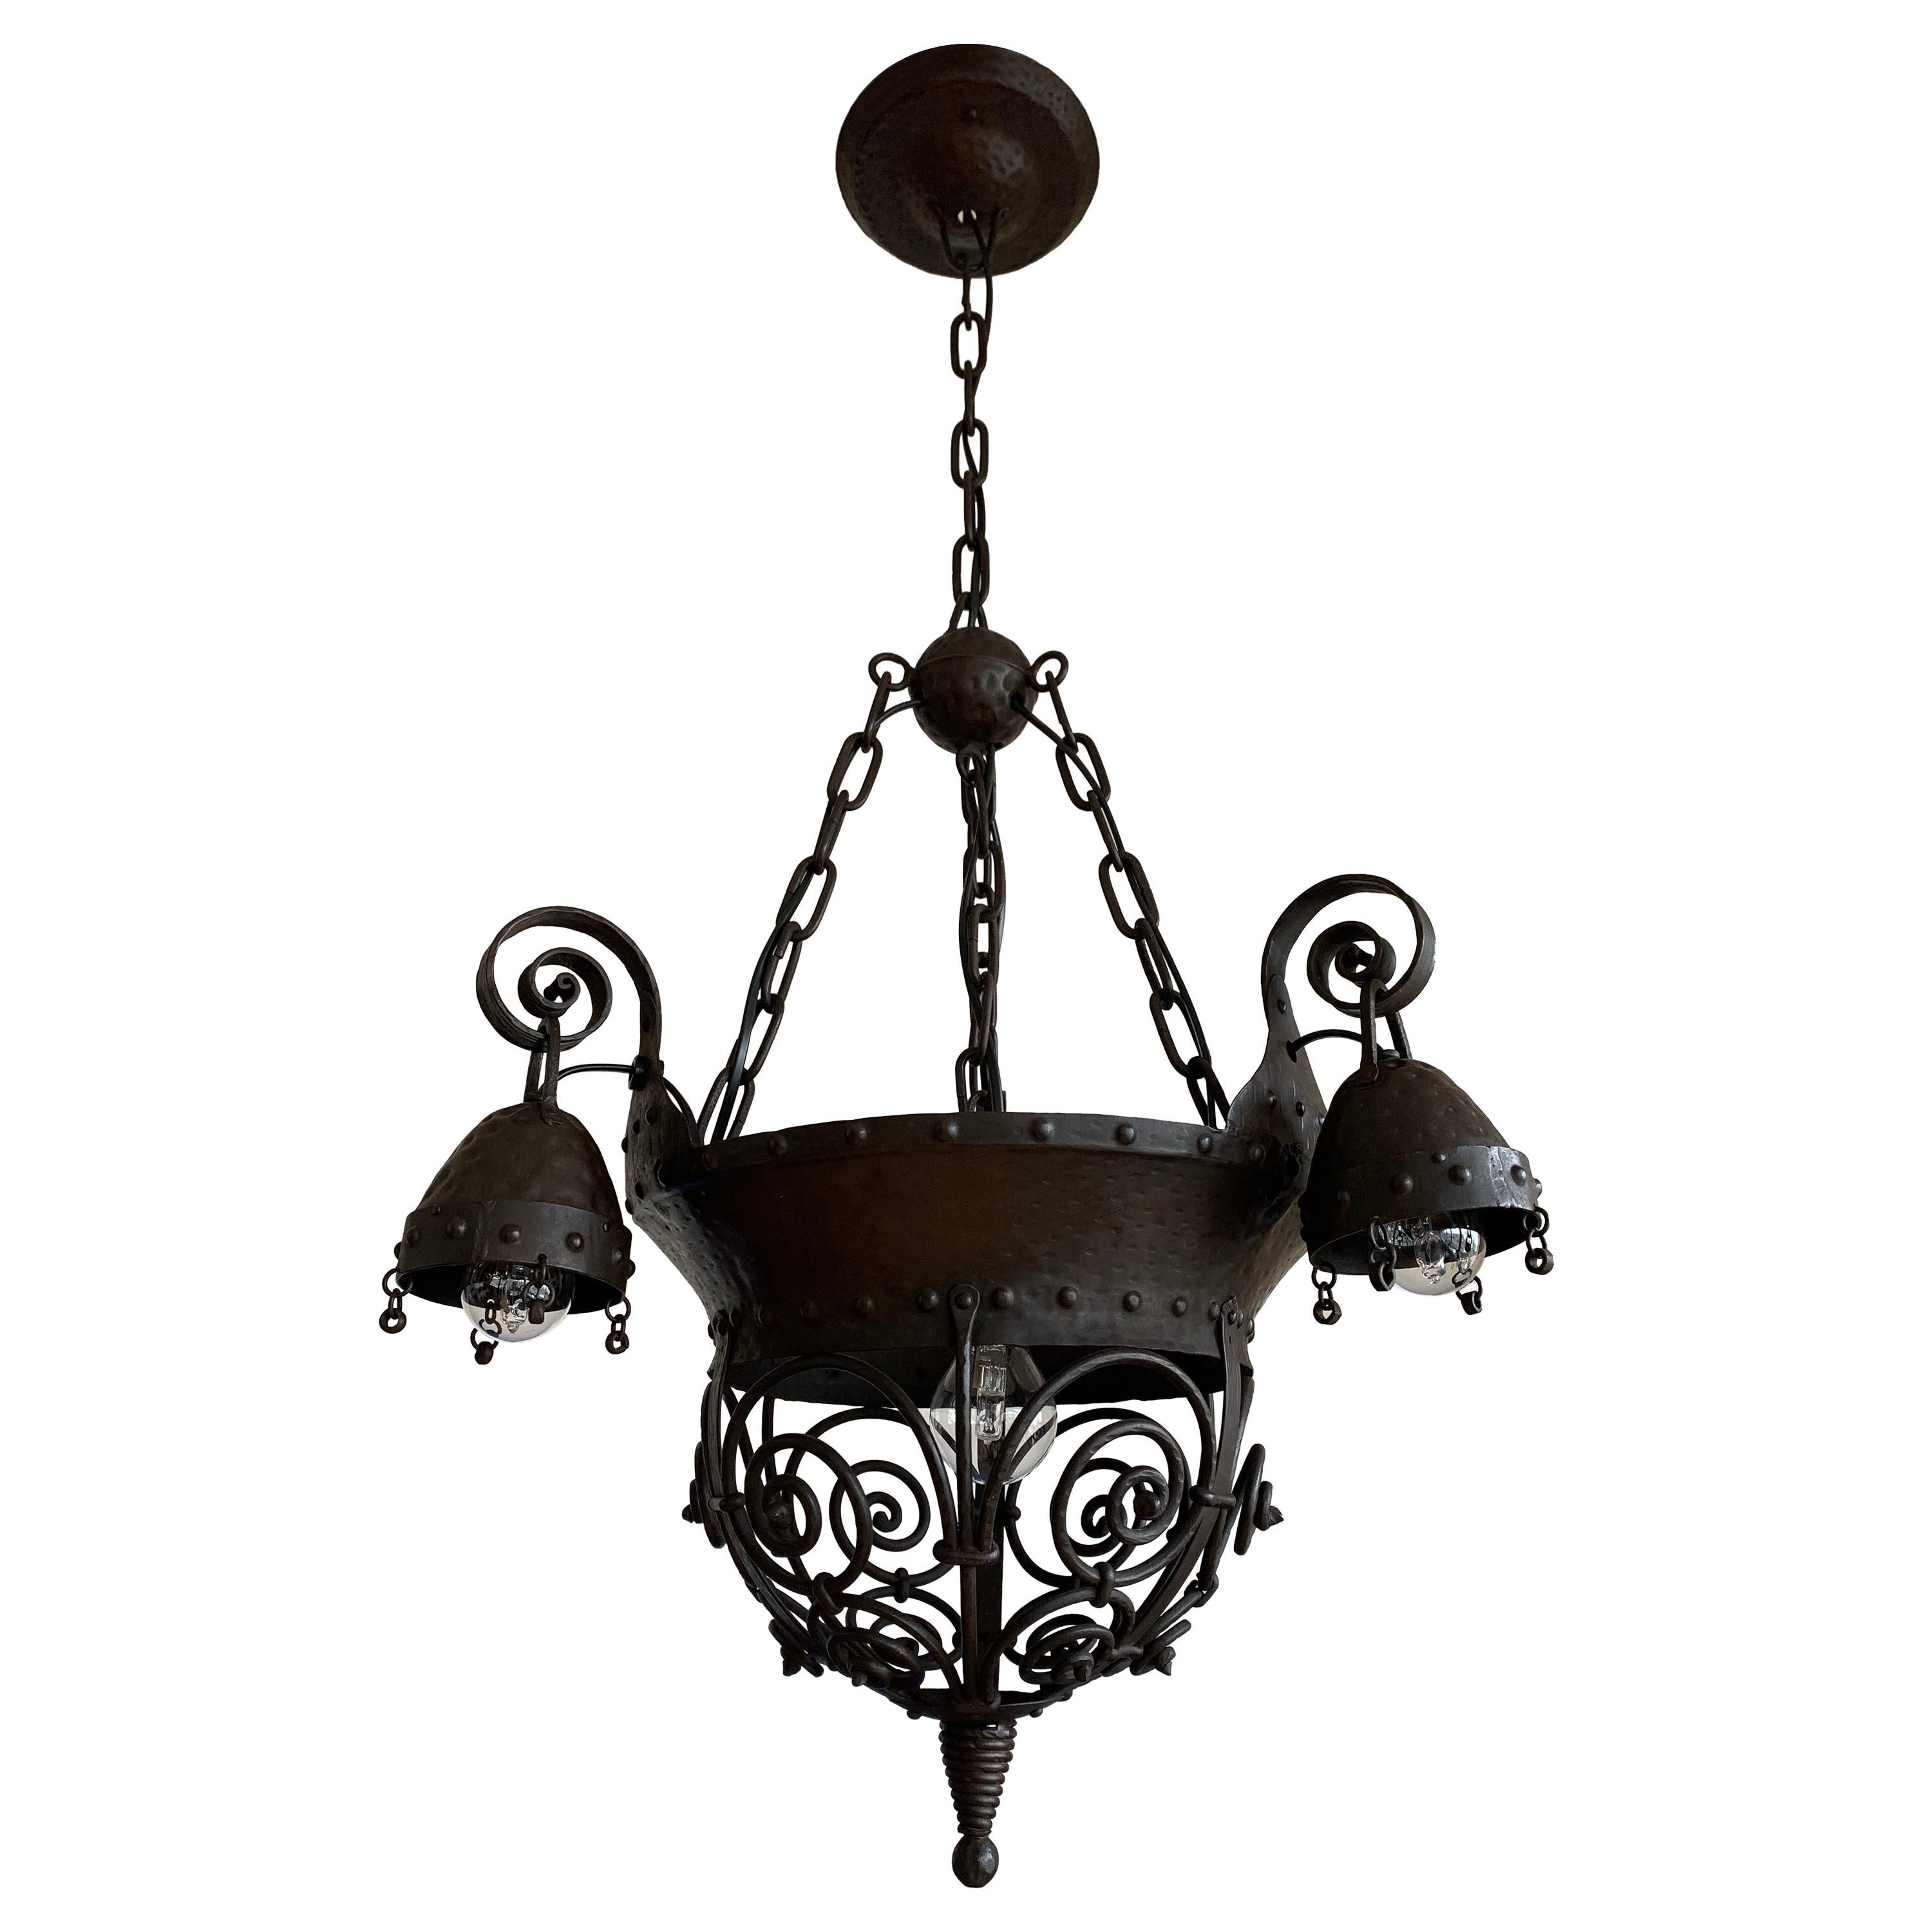 Unique Arts and Crafts Crafted Wrought Iron Chandelier / 4-Light Fixture, 1890s